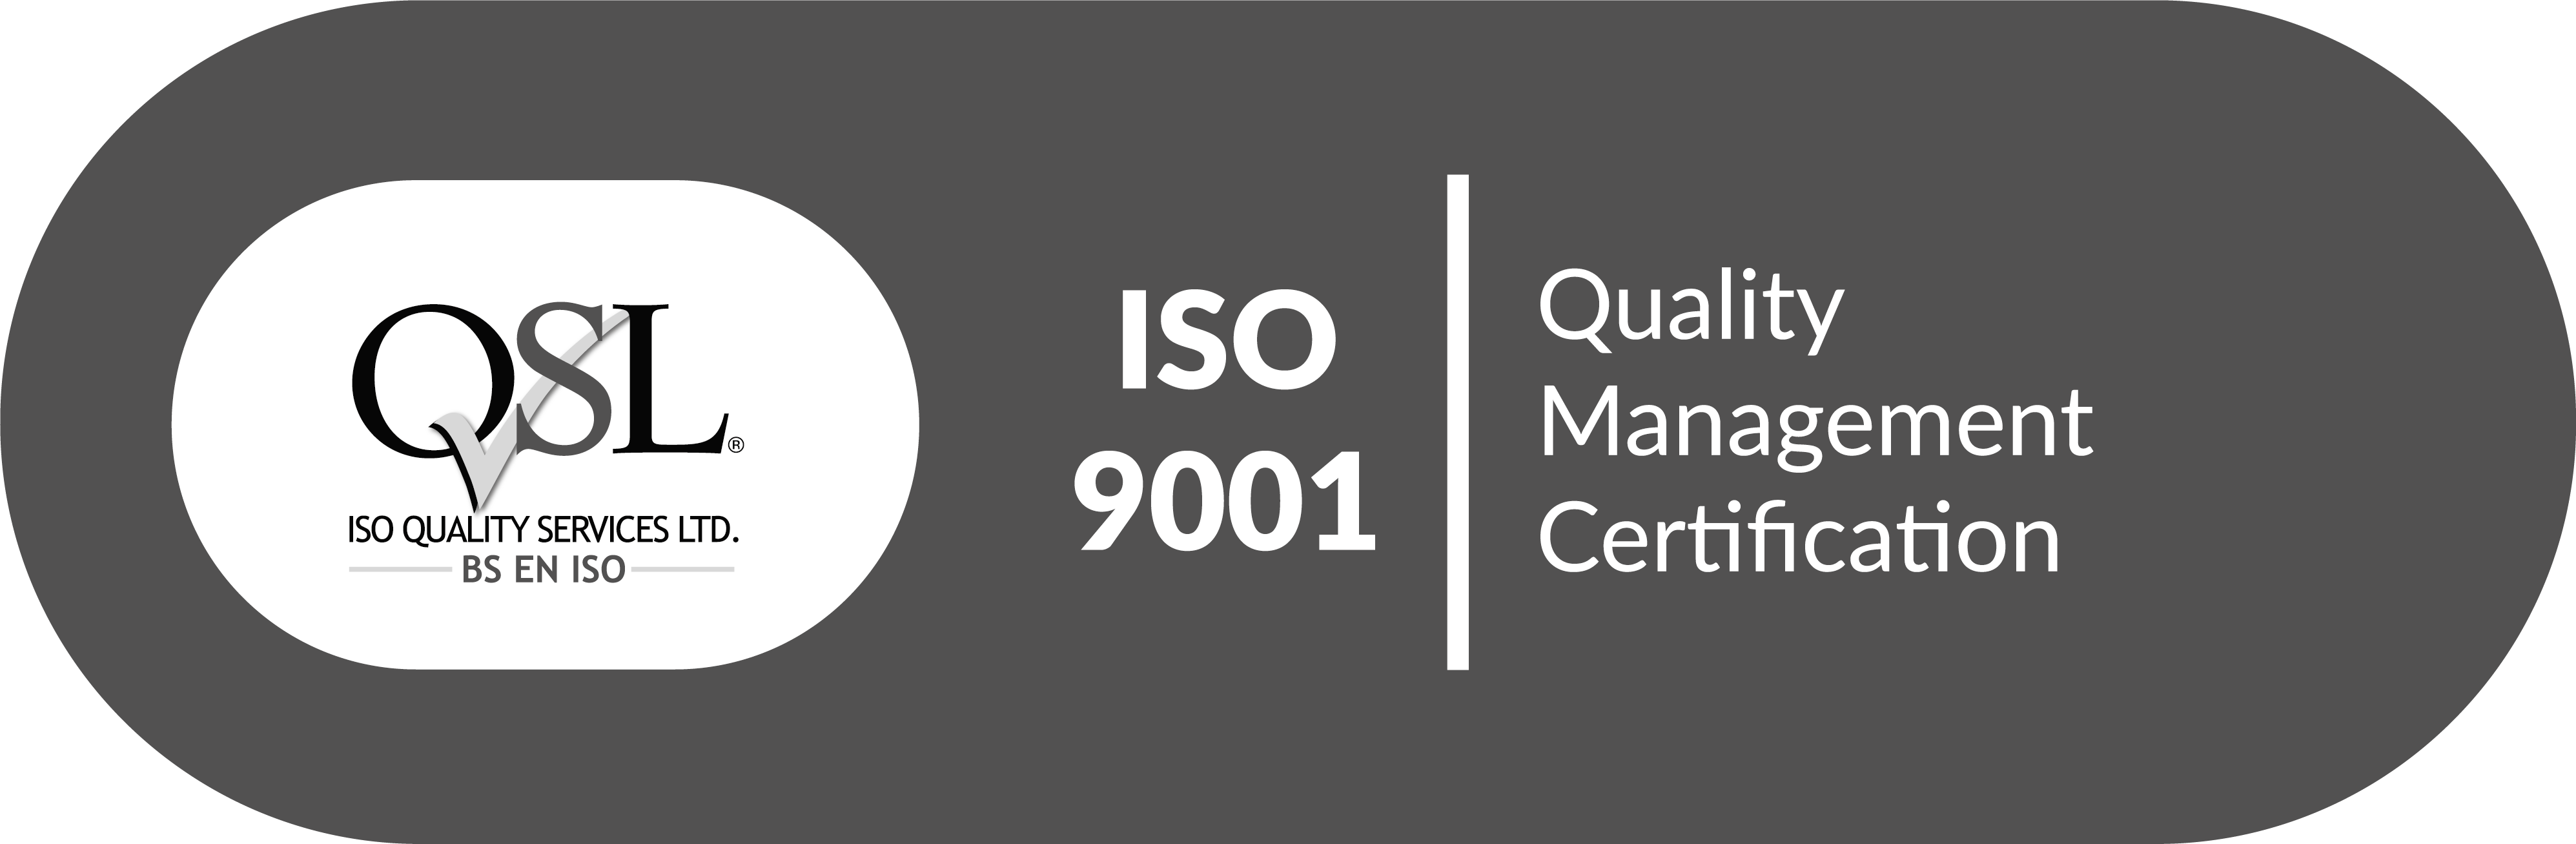 ISO 9001 quality management certification logo